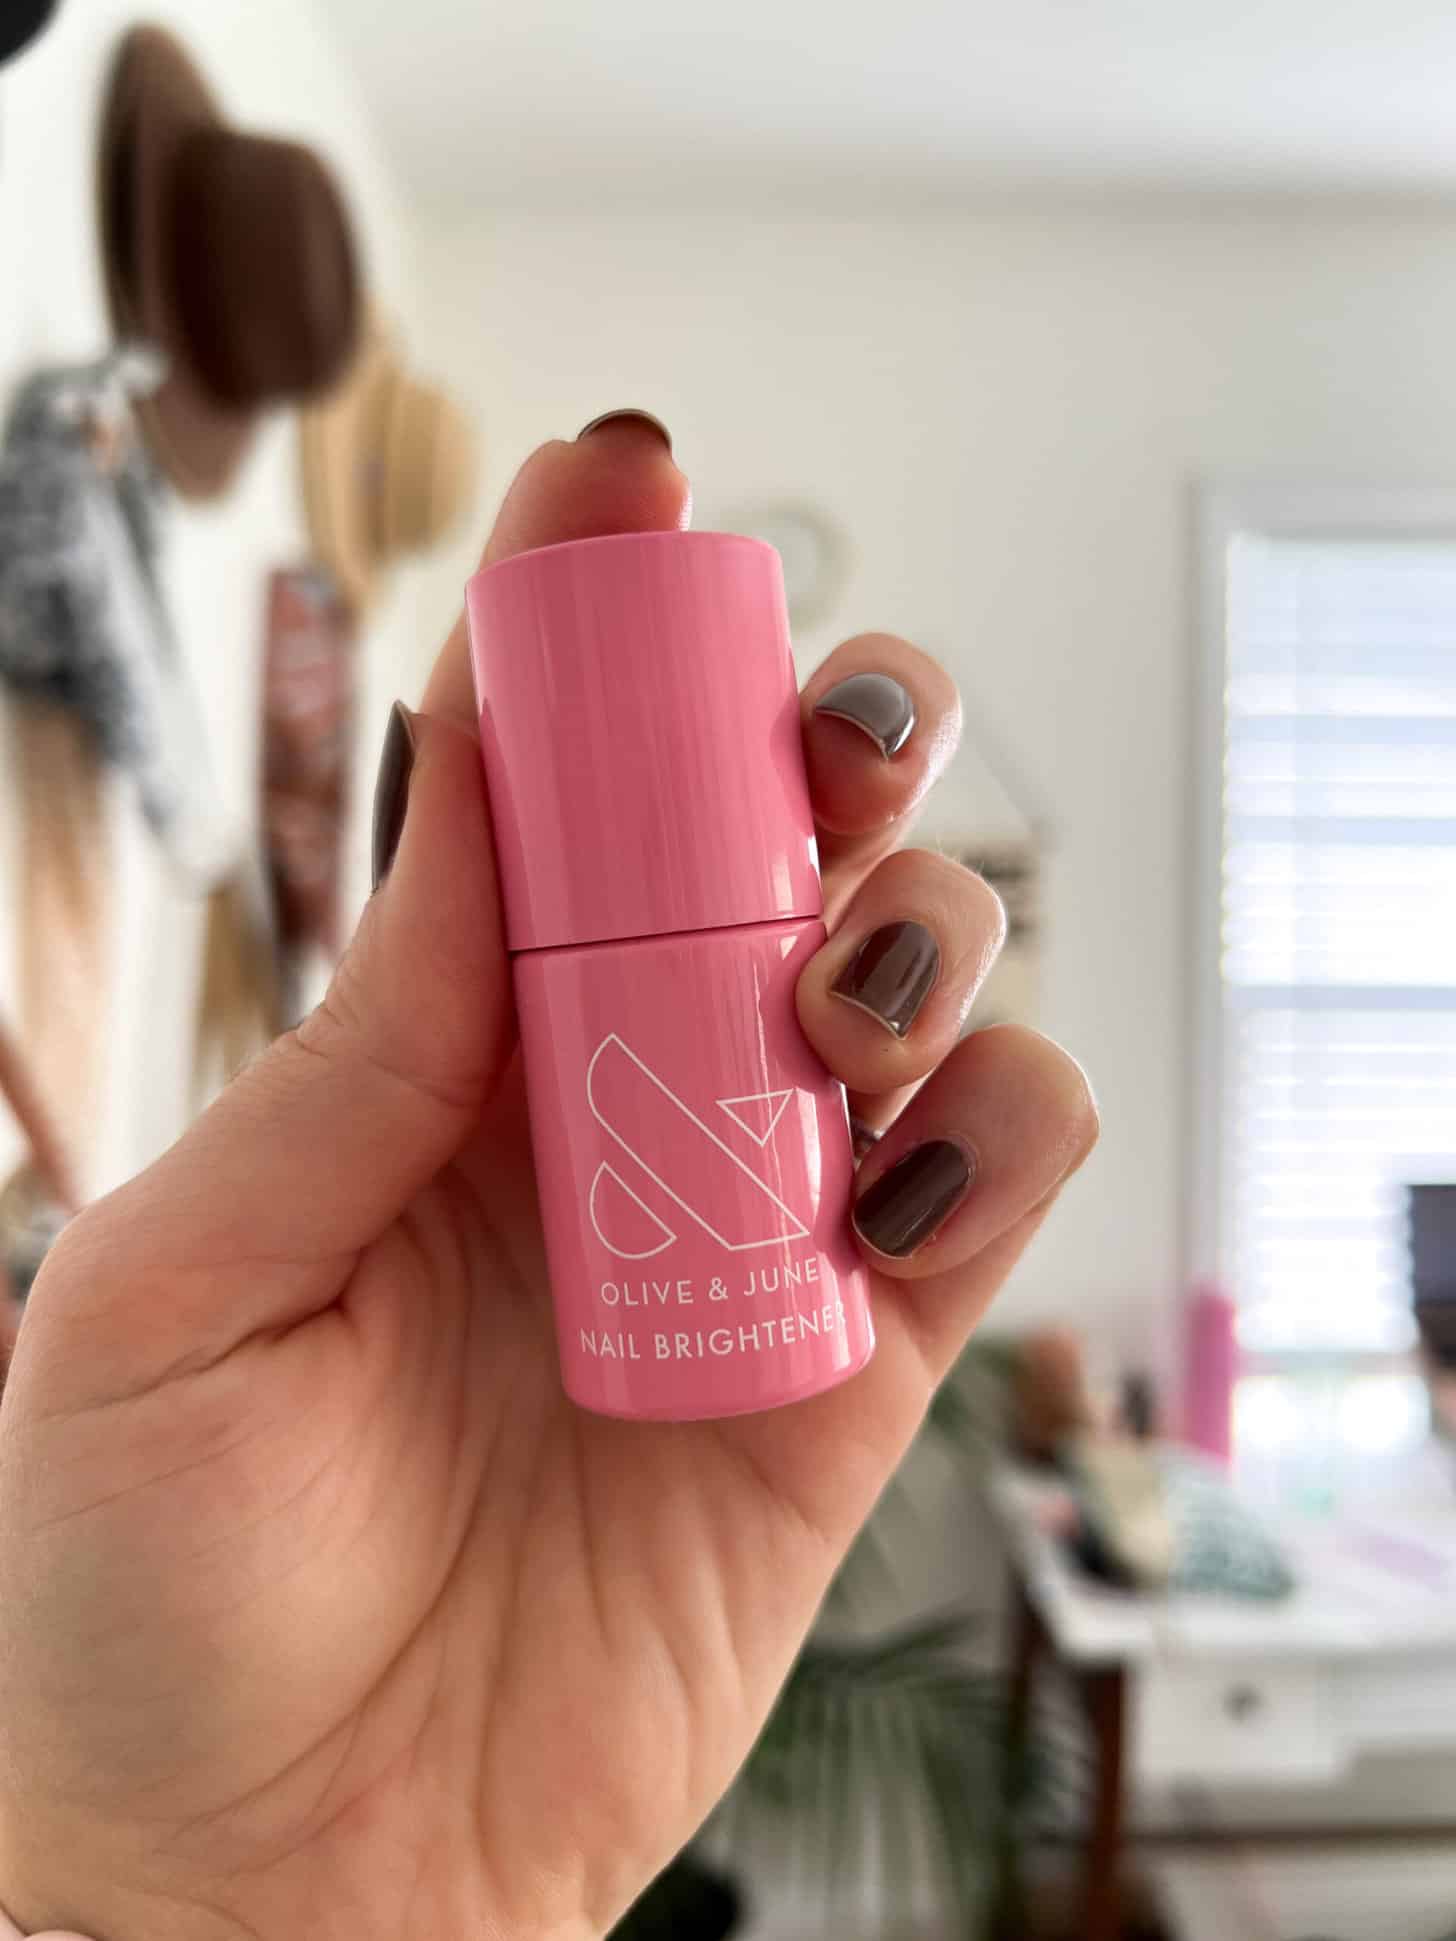 A hand holds up a bottle of Olive & June Nail Brightener.